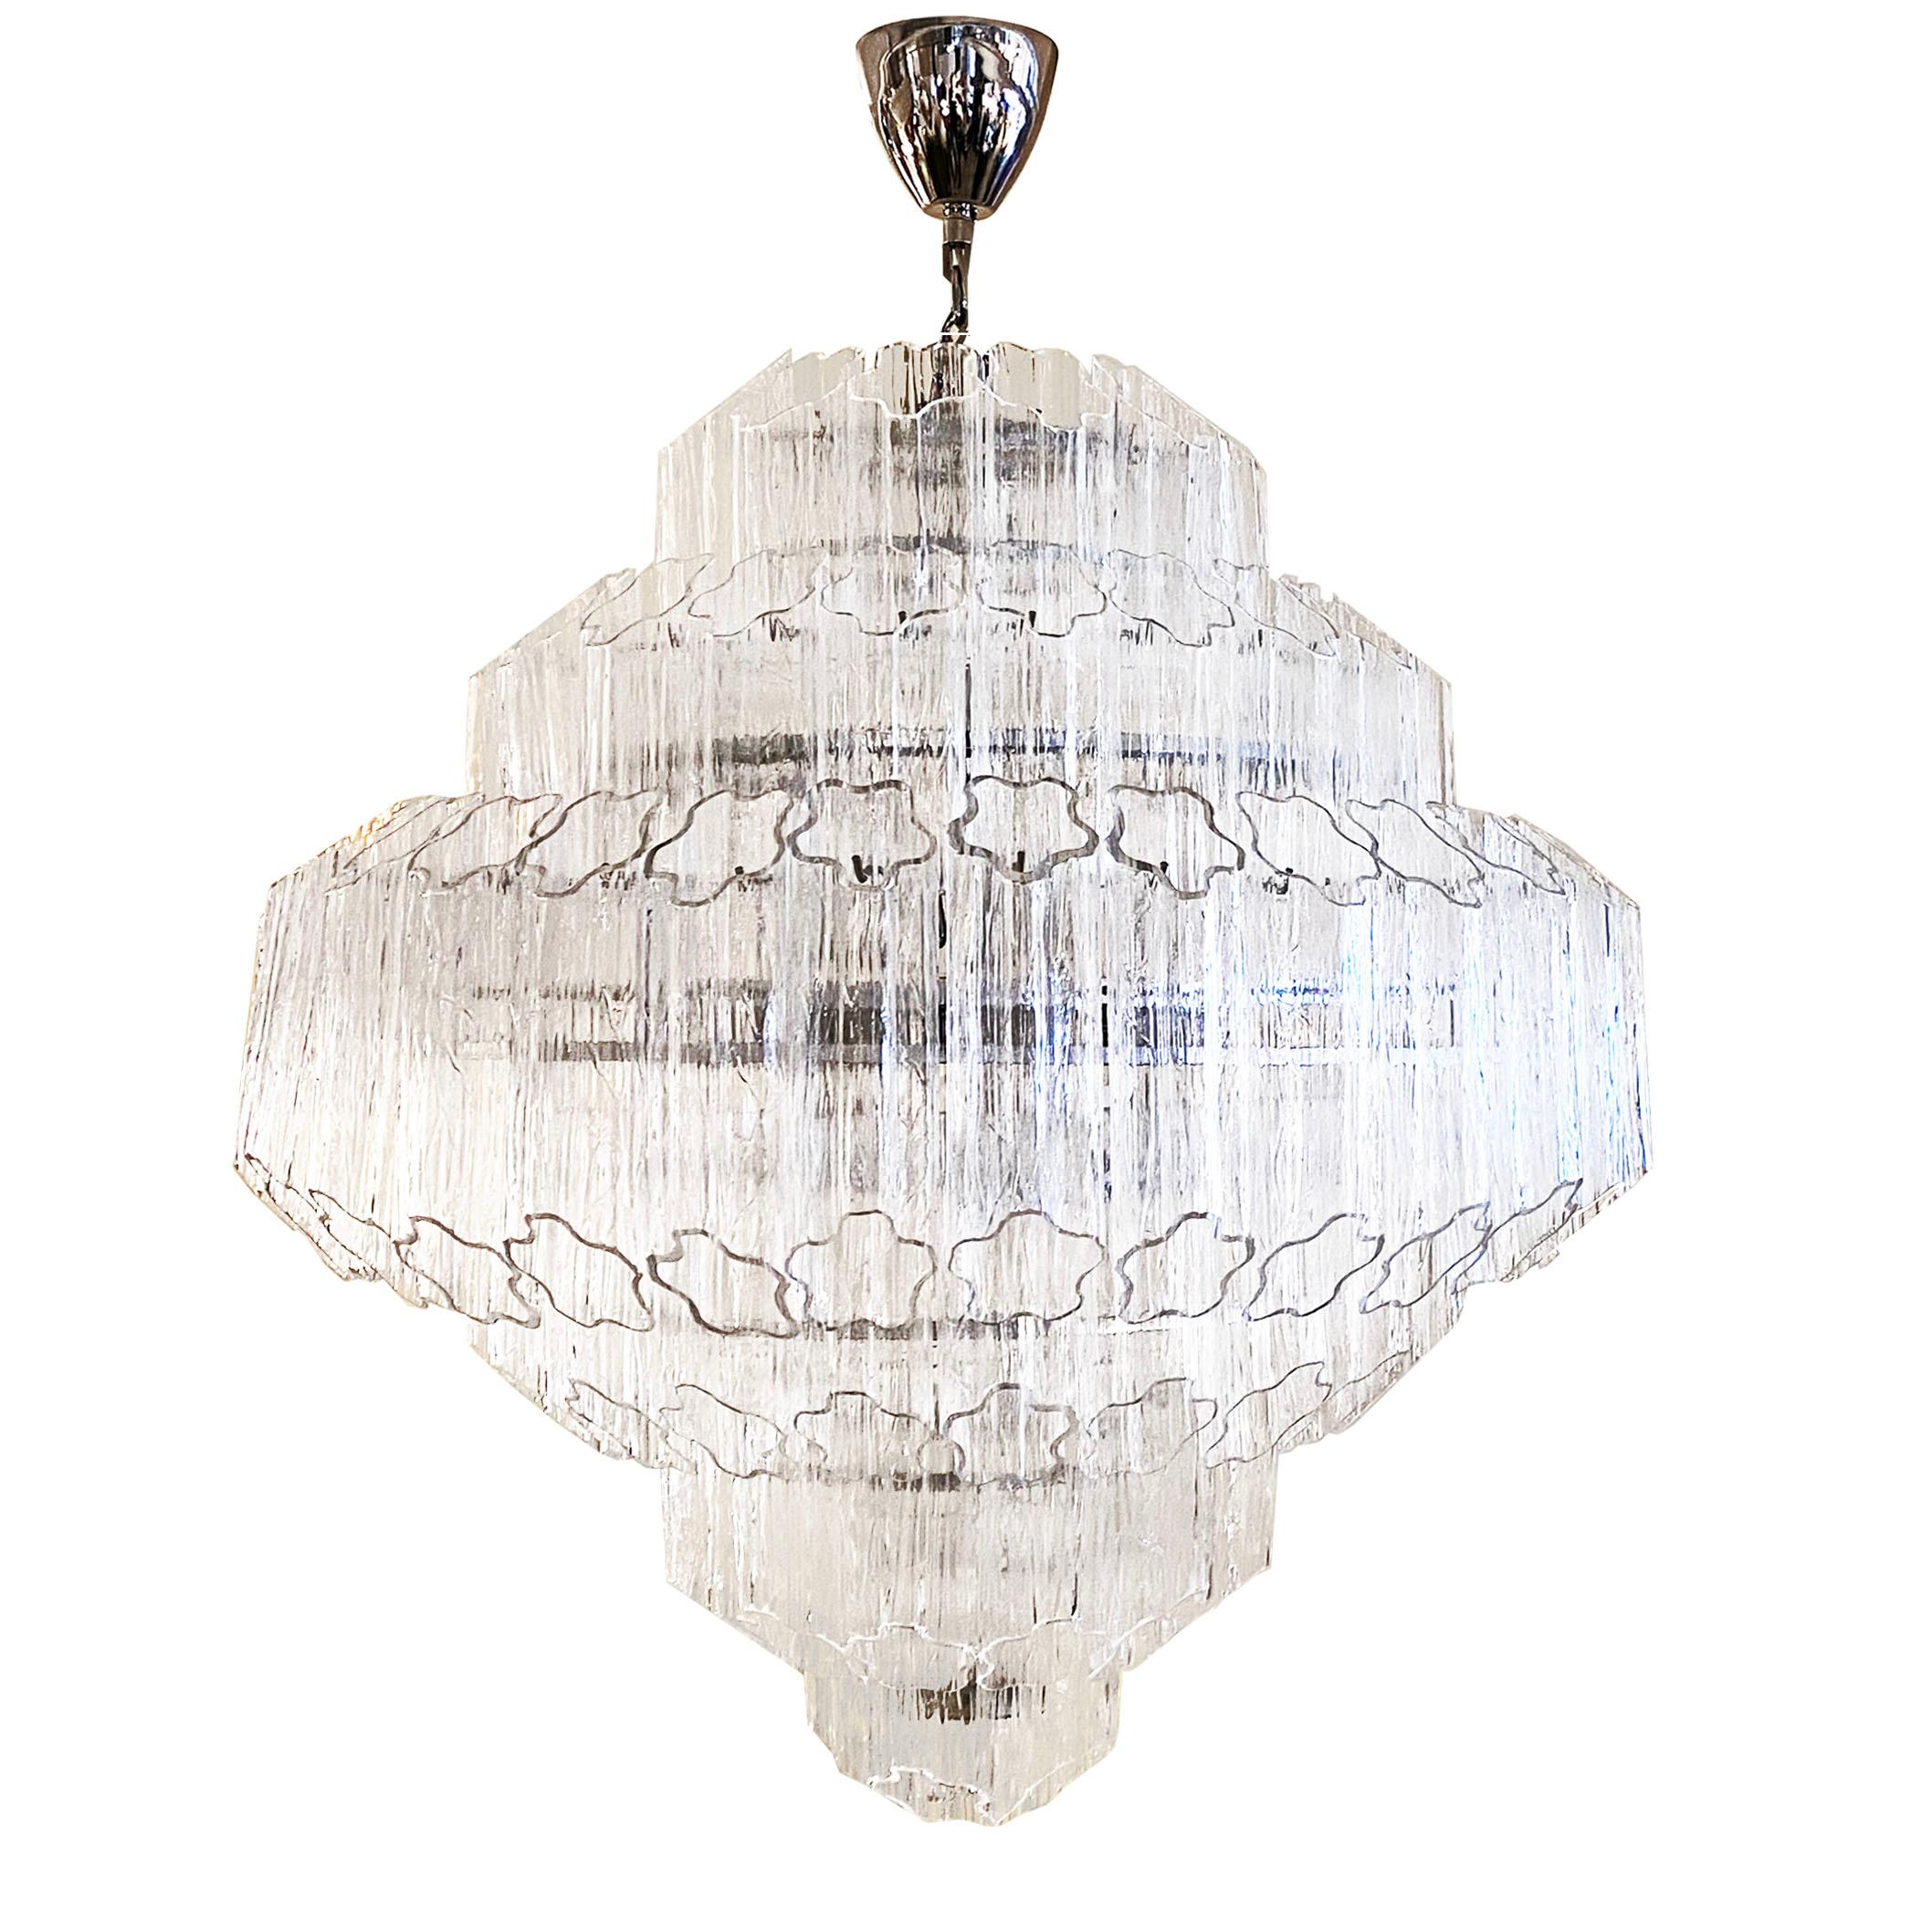 A contemporary creation to bring dazzling light and airiness in any interior, this bespoke contemporary Italian organic light fixture is in blown Murano glass that looks like crystal. The Art Deco geometric shape is composed of waved glass tubes